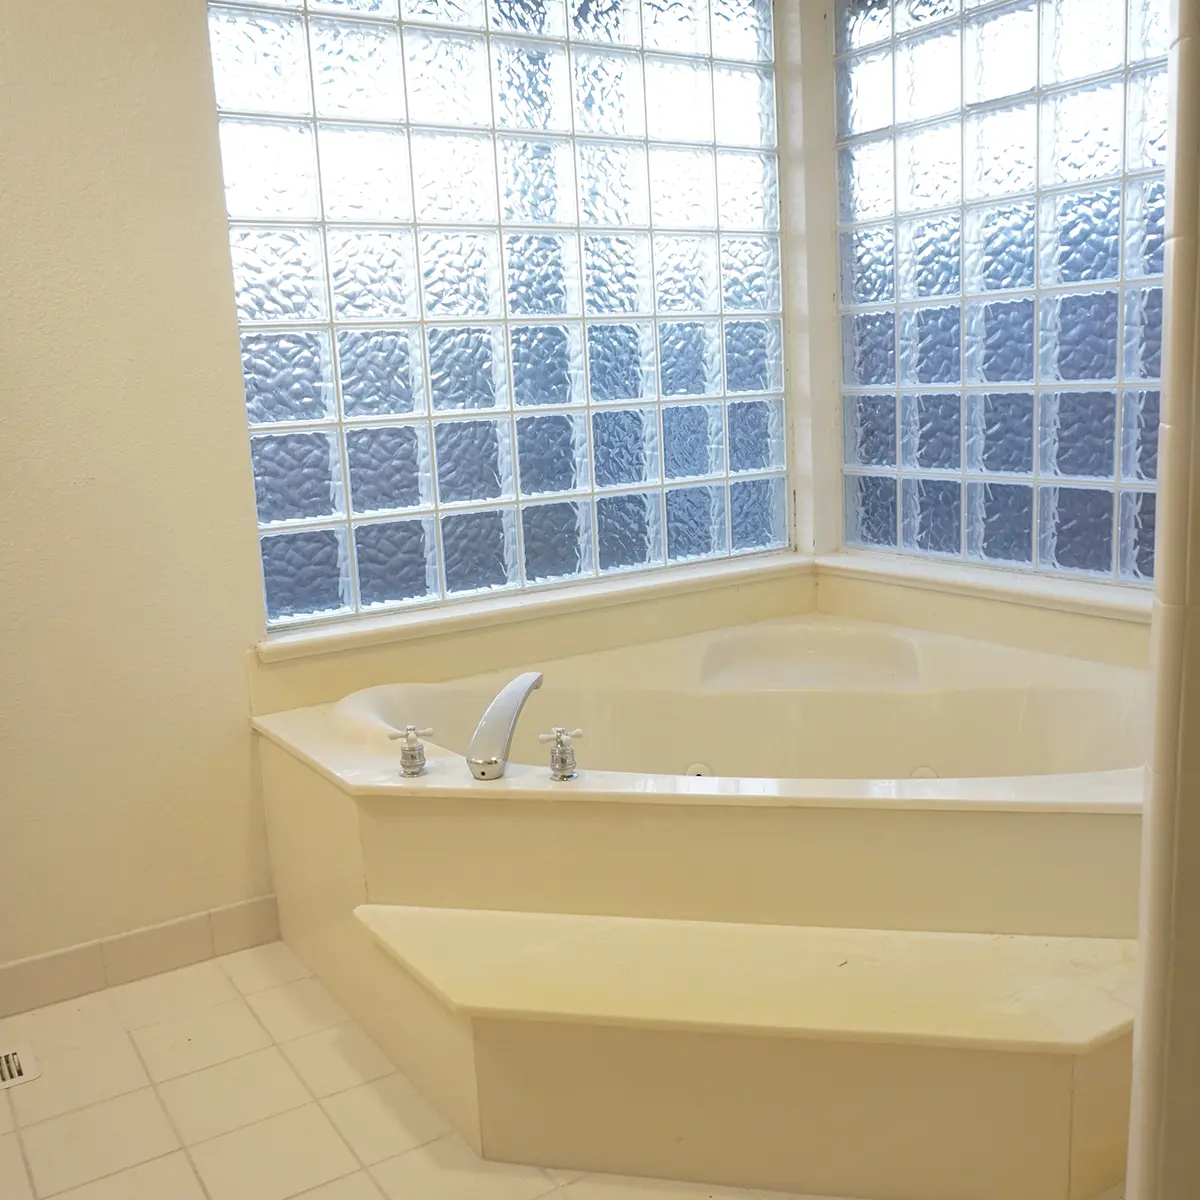 A jacuzzi tub with old an old window in a bathroom before its remodel